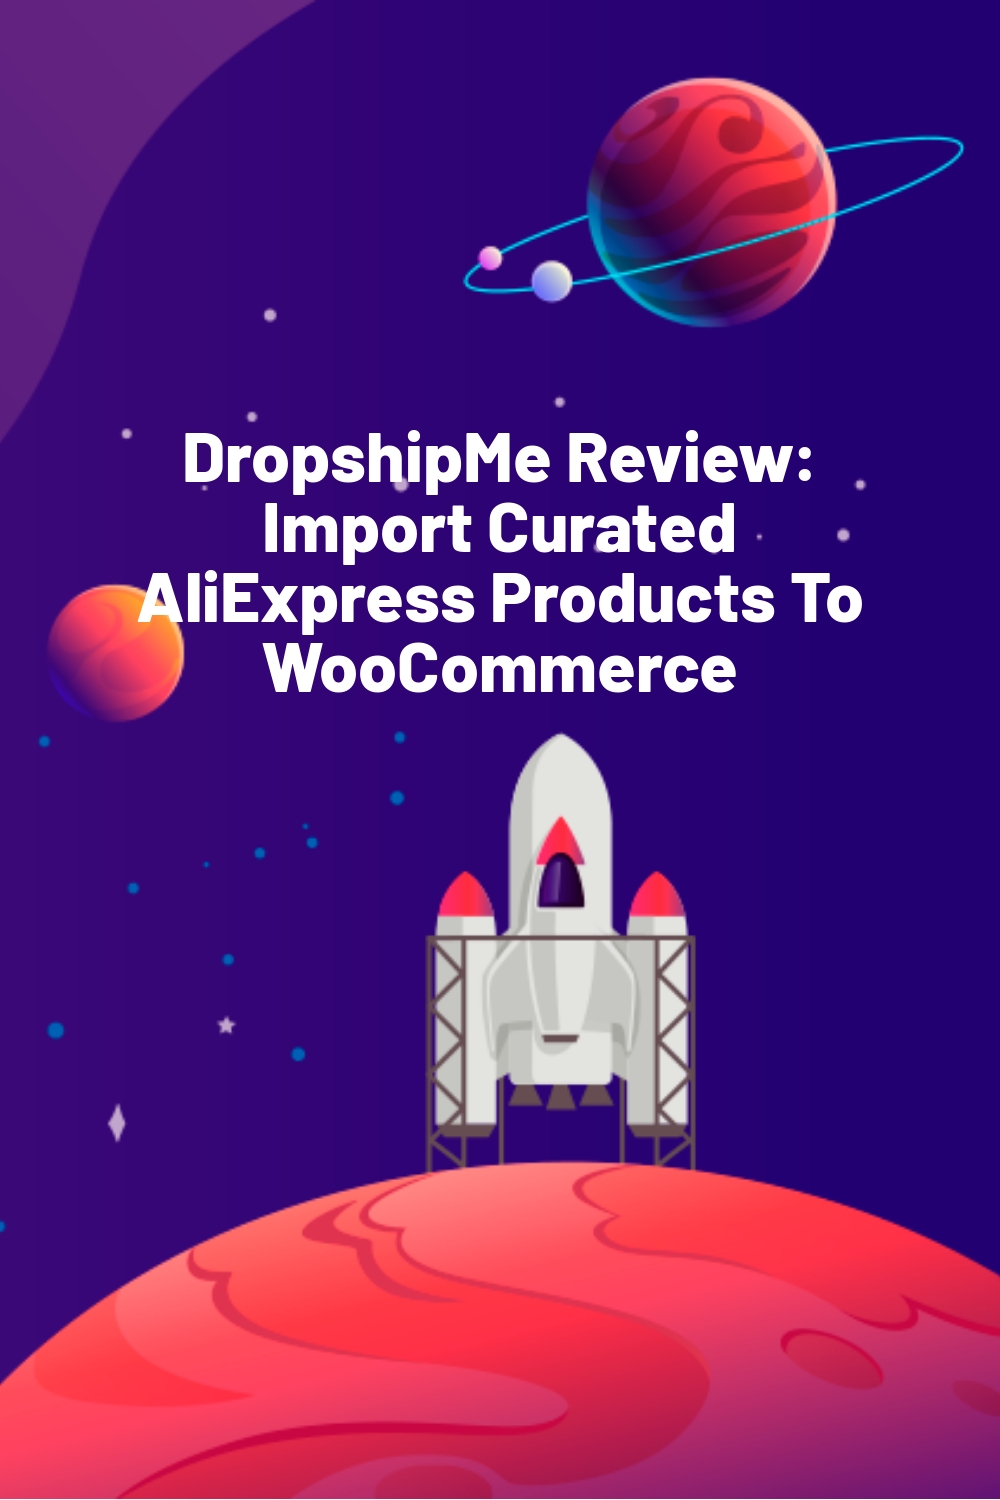 DropshipMe Review: Import Curated AliExpress Products To WooCommerce